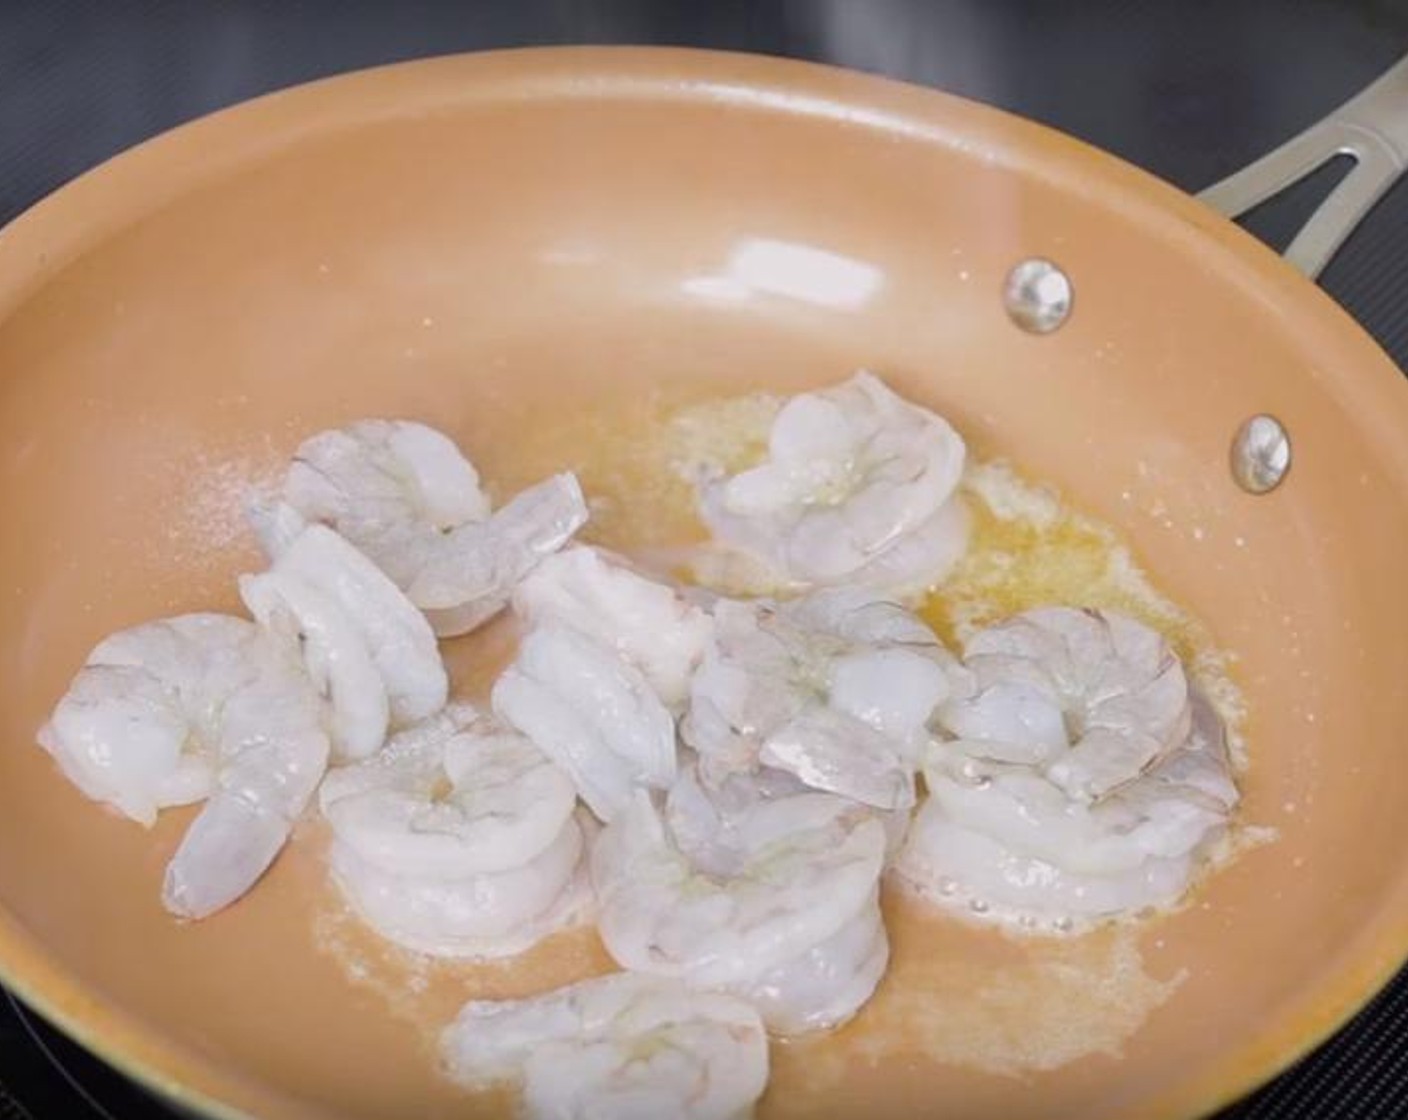 step 1 To a large non-stick skillet or wok, add the Butter (2 Tbsp) allow to melt. Add Shrimp (1 lb), season with Salt (to taste) and Ground Black Pepper (to taste), and cook over medium-high heat for about three minutes. Remove shrimps and set aside.